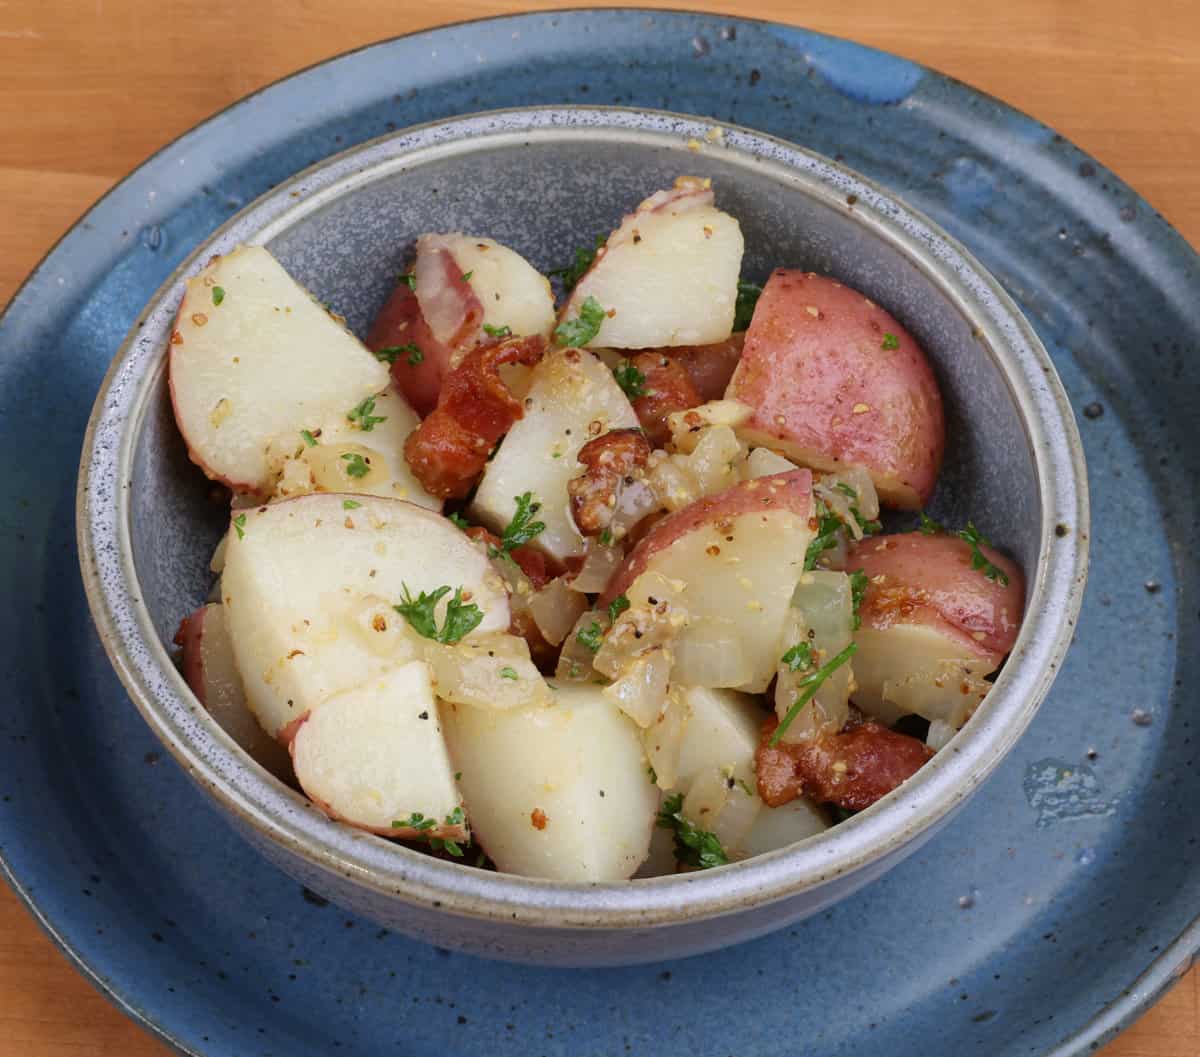 a bowl of warm potato salad on a wooden table.